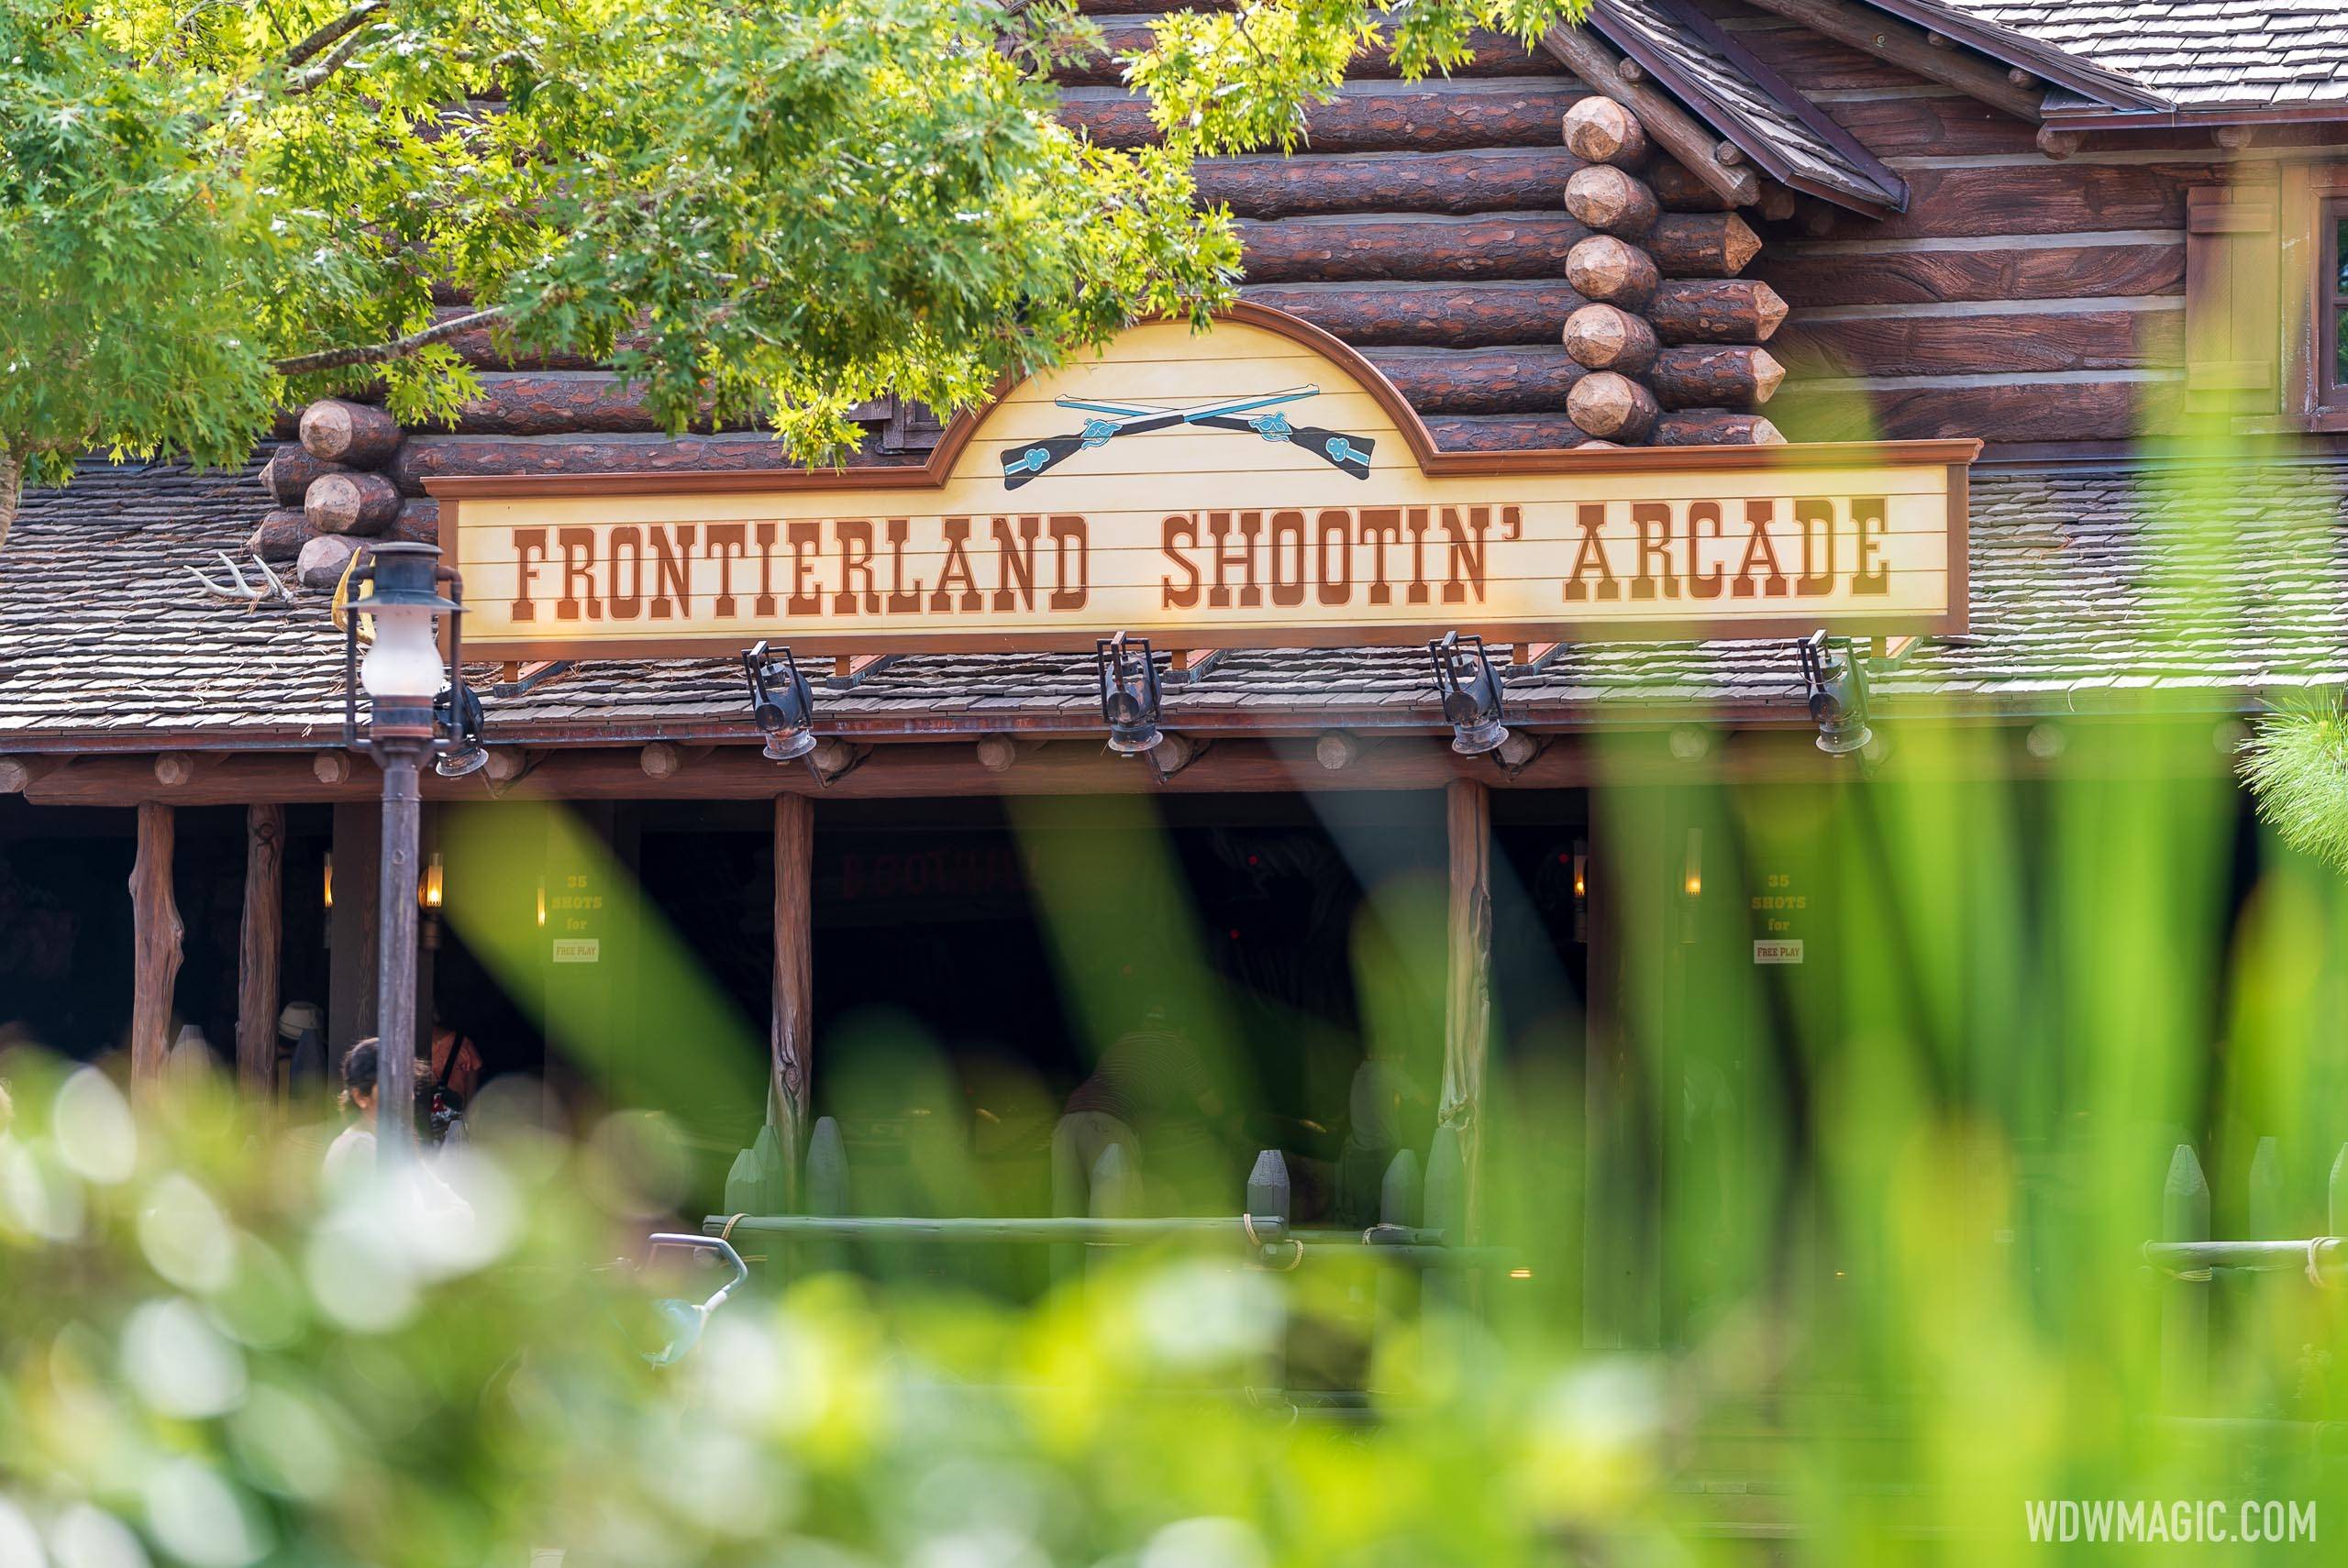 Is time up for the Frontierland Shootin' Arcade at Magic Kingdom?